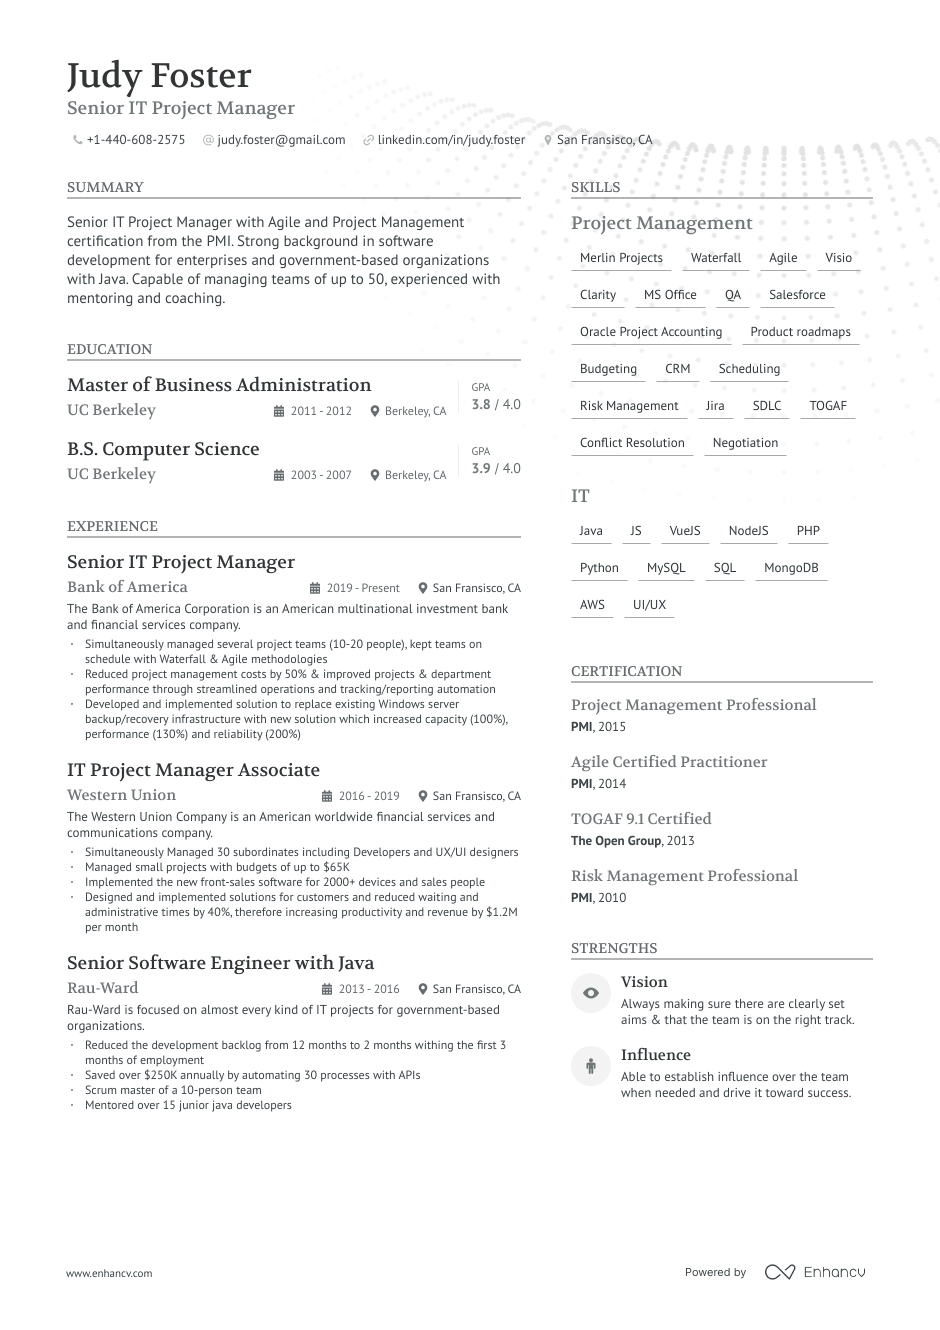 Senior IT project manager resume example